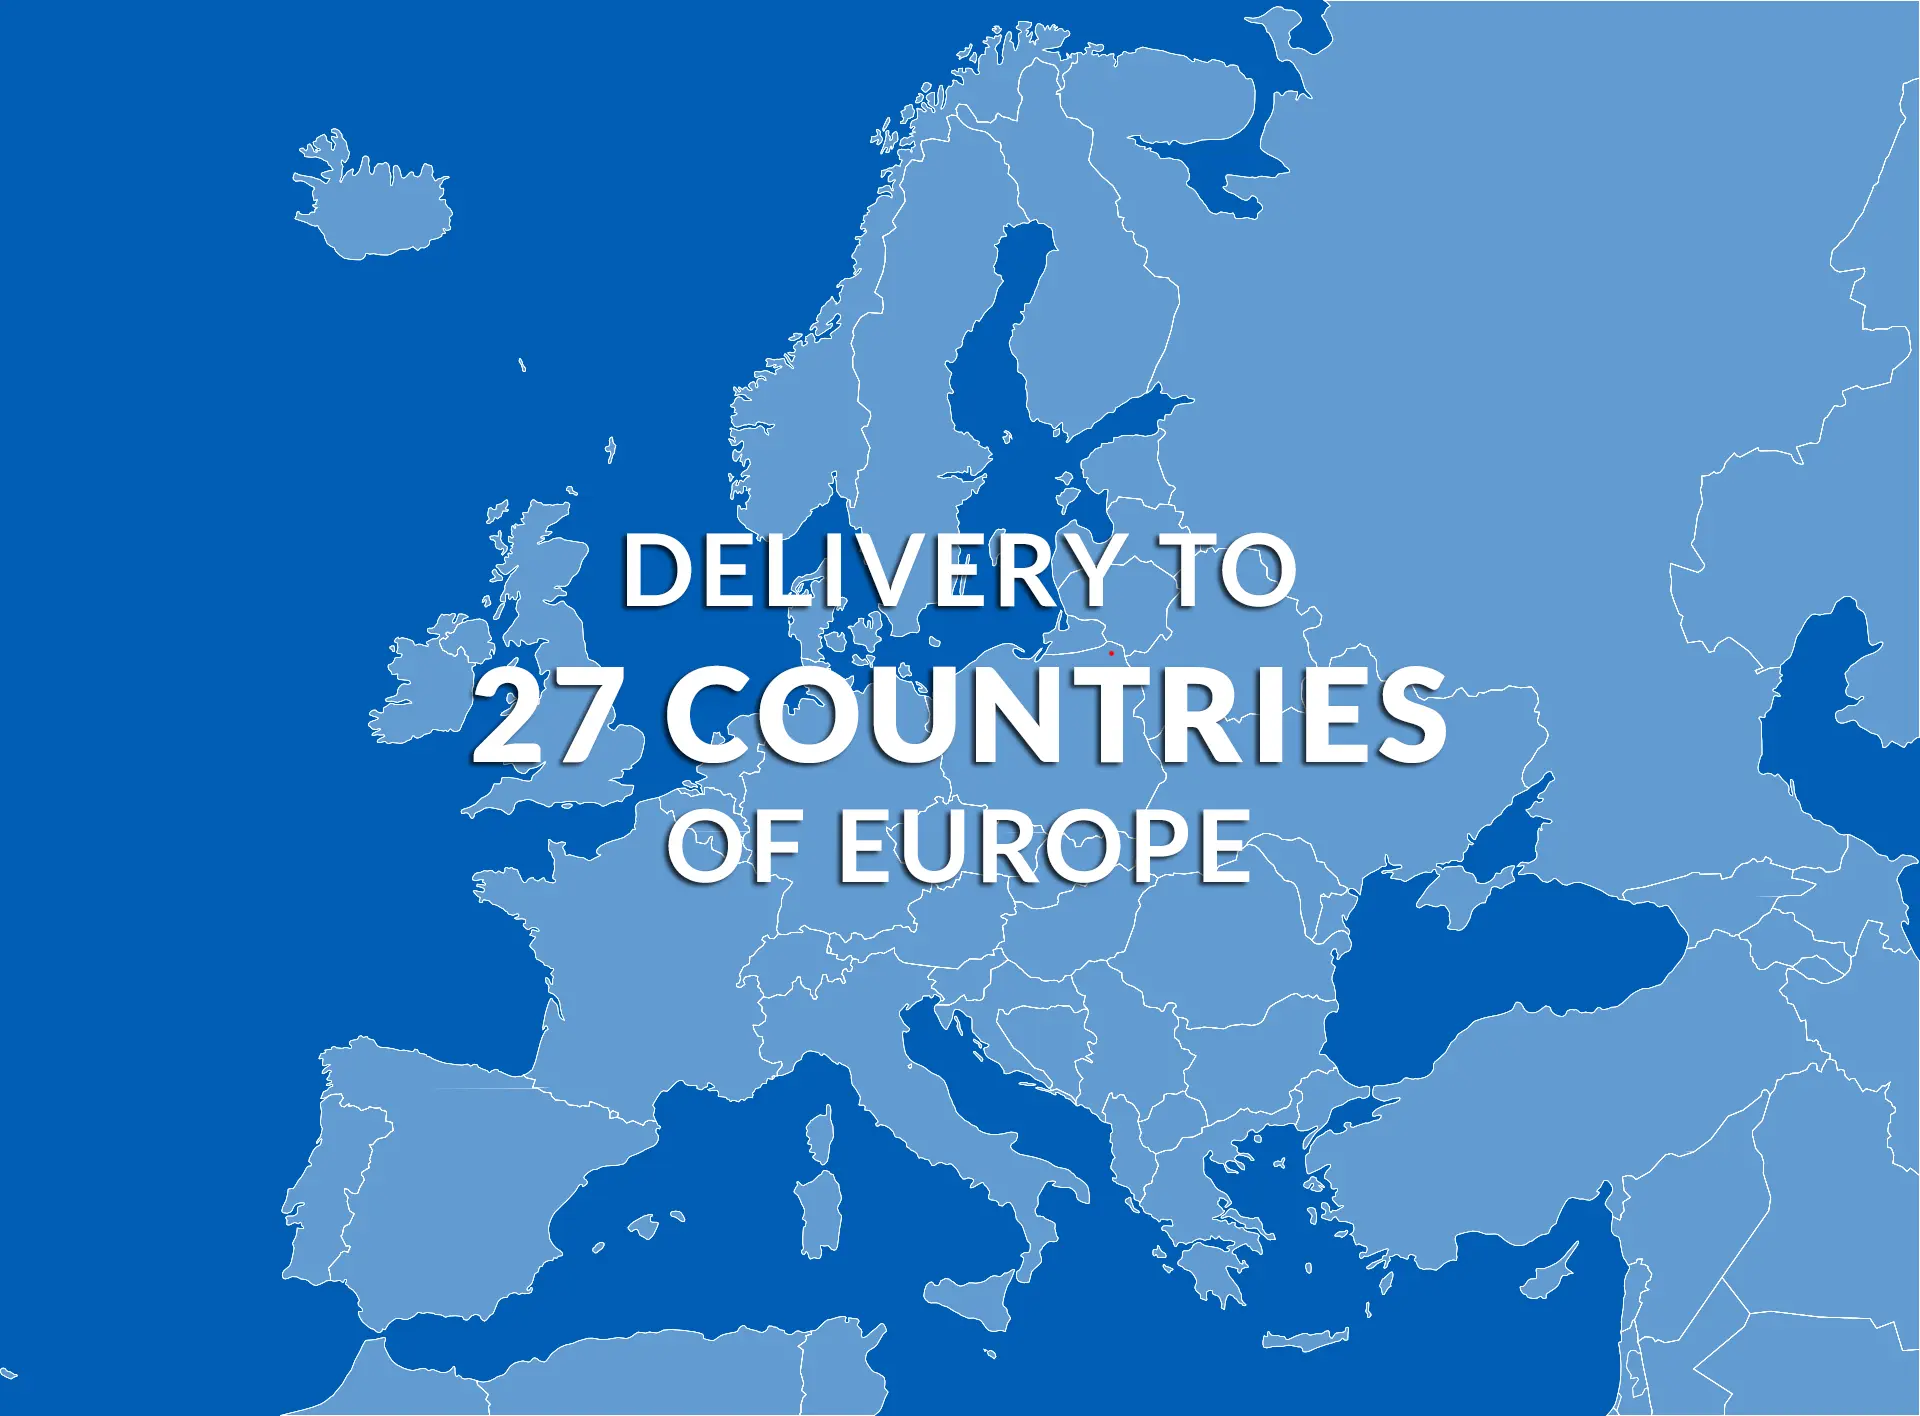 We deliver rims to 27 European countries